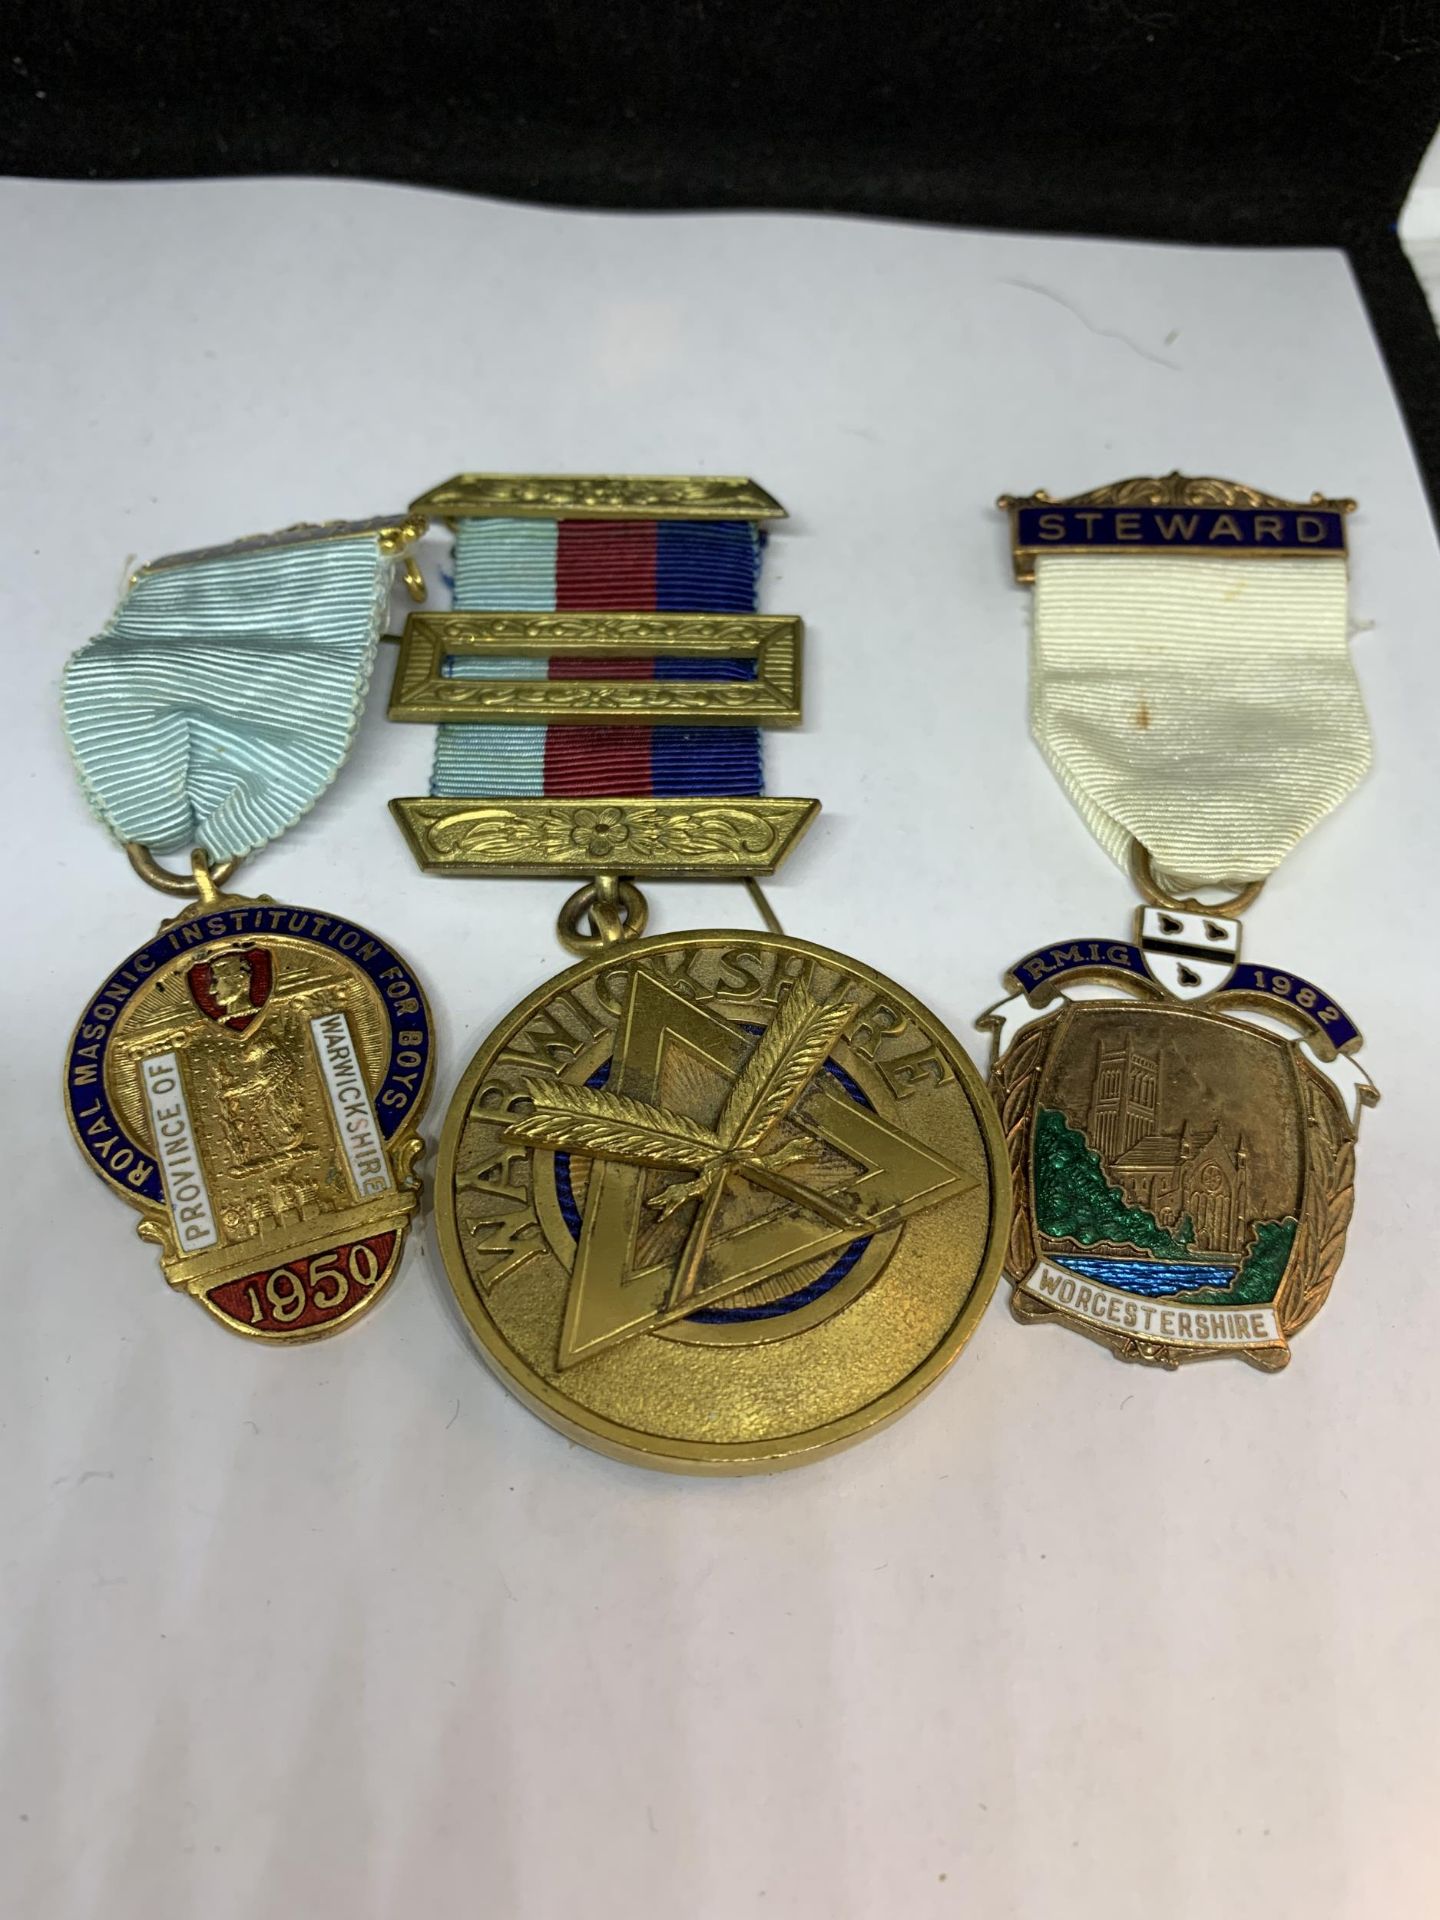 FIVE VARIOUS MASONIC MEDALS ON RIBBONS - Image 3 of 3